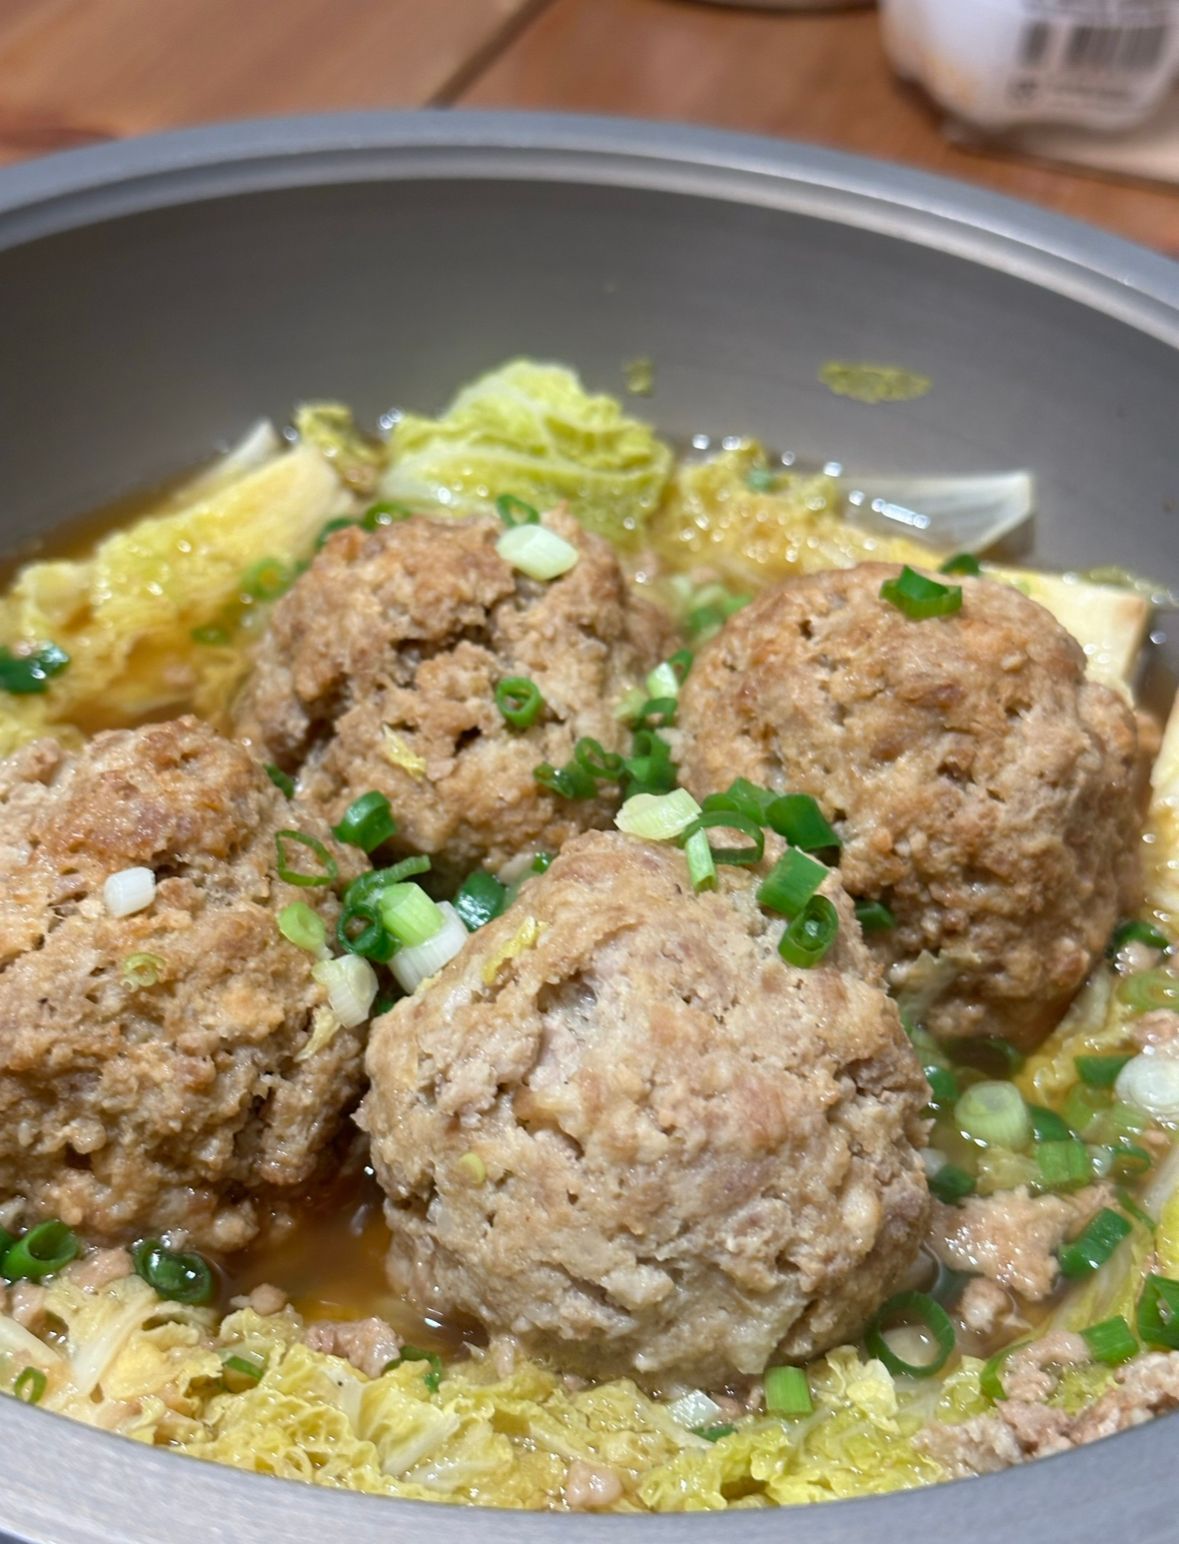 Meatballs made with love